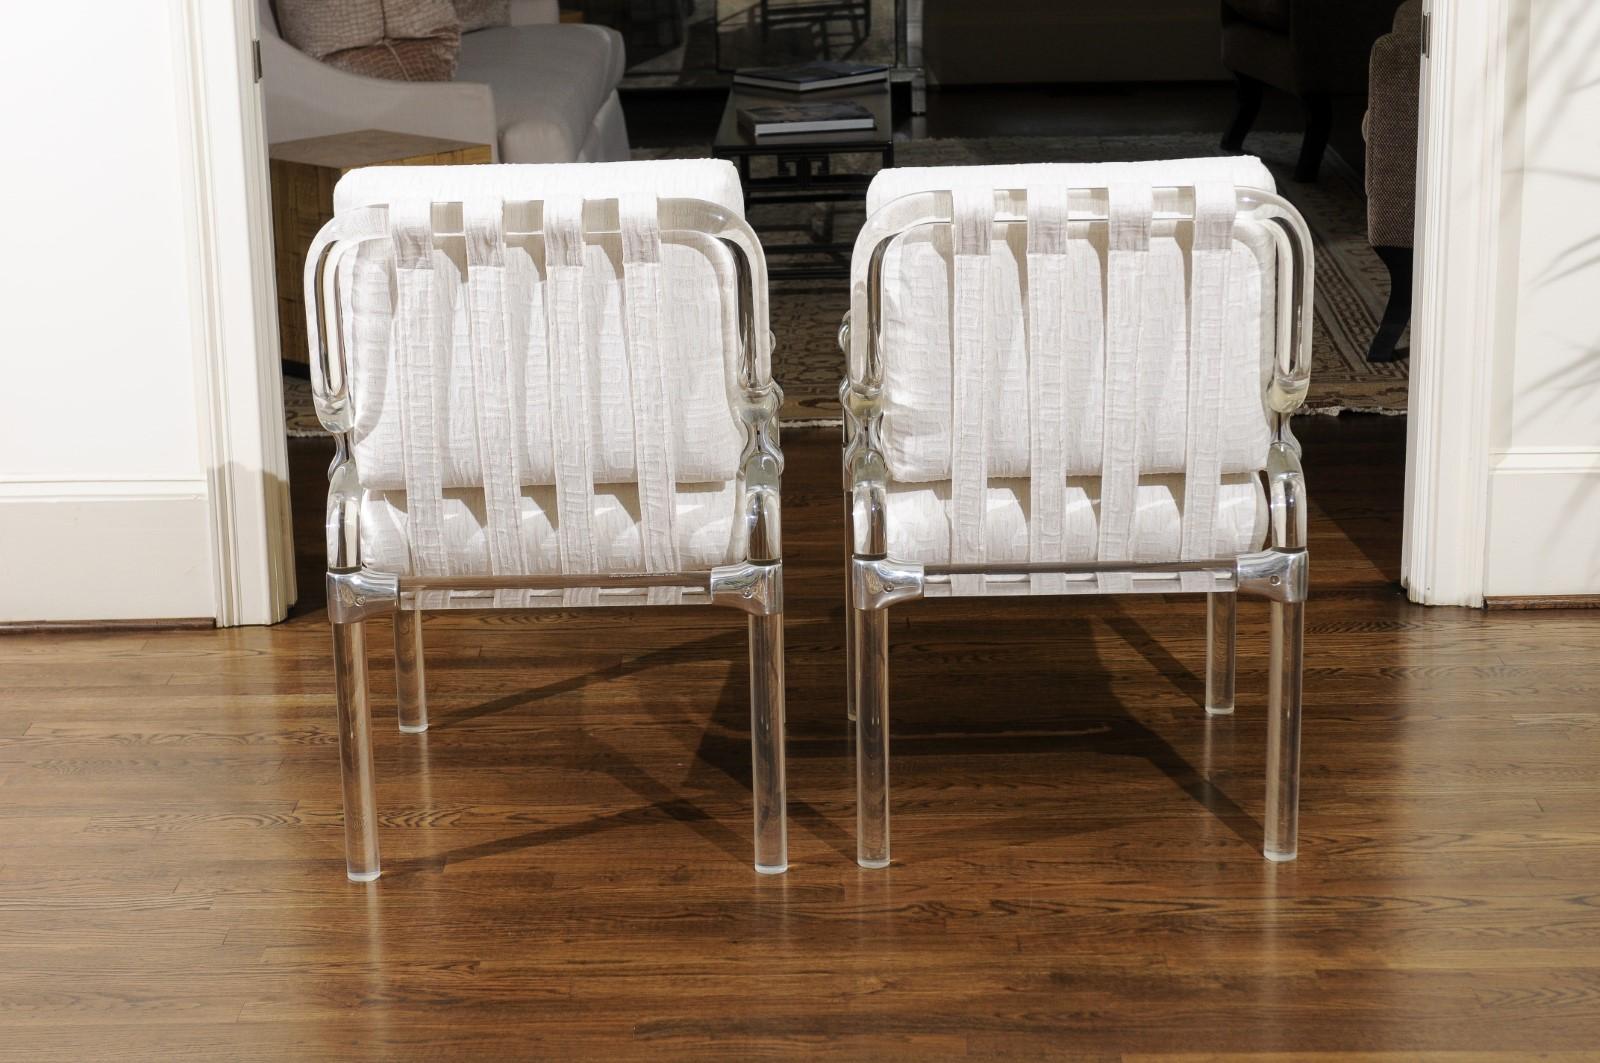 Staggering Set of 8 Lucite Arm Dining Chairs by Jeff Messerschmidt, 1985 For Sale 2